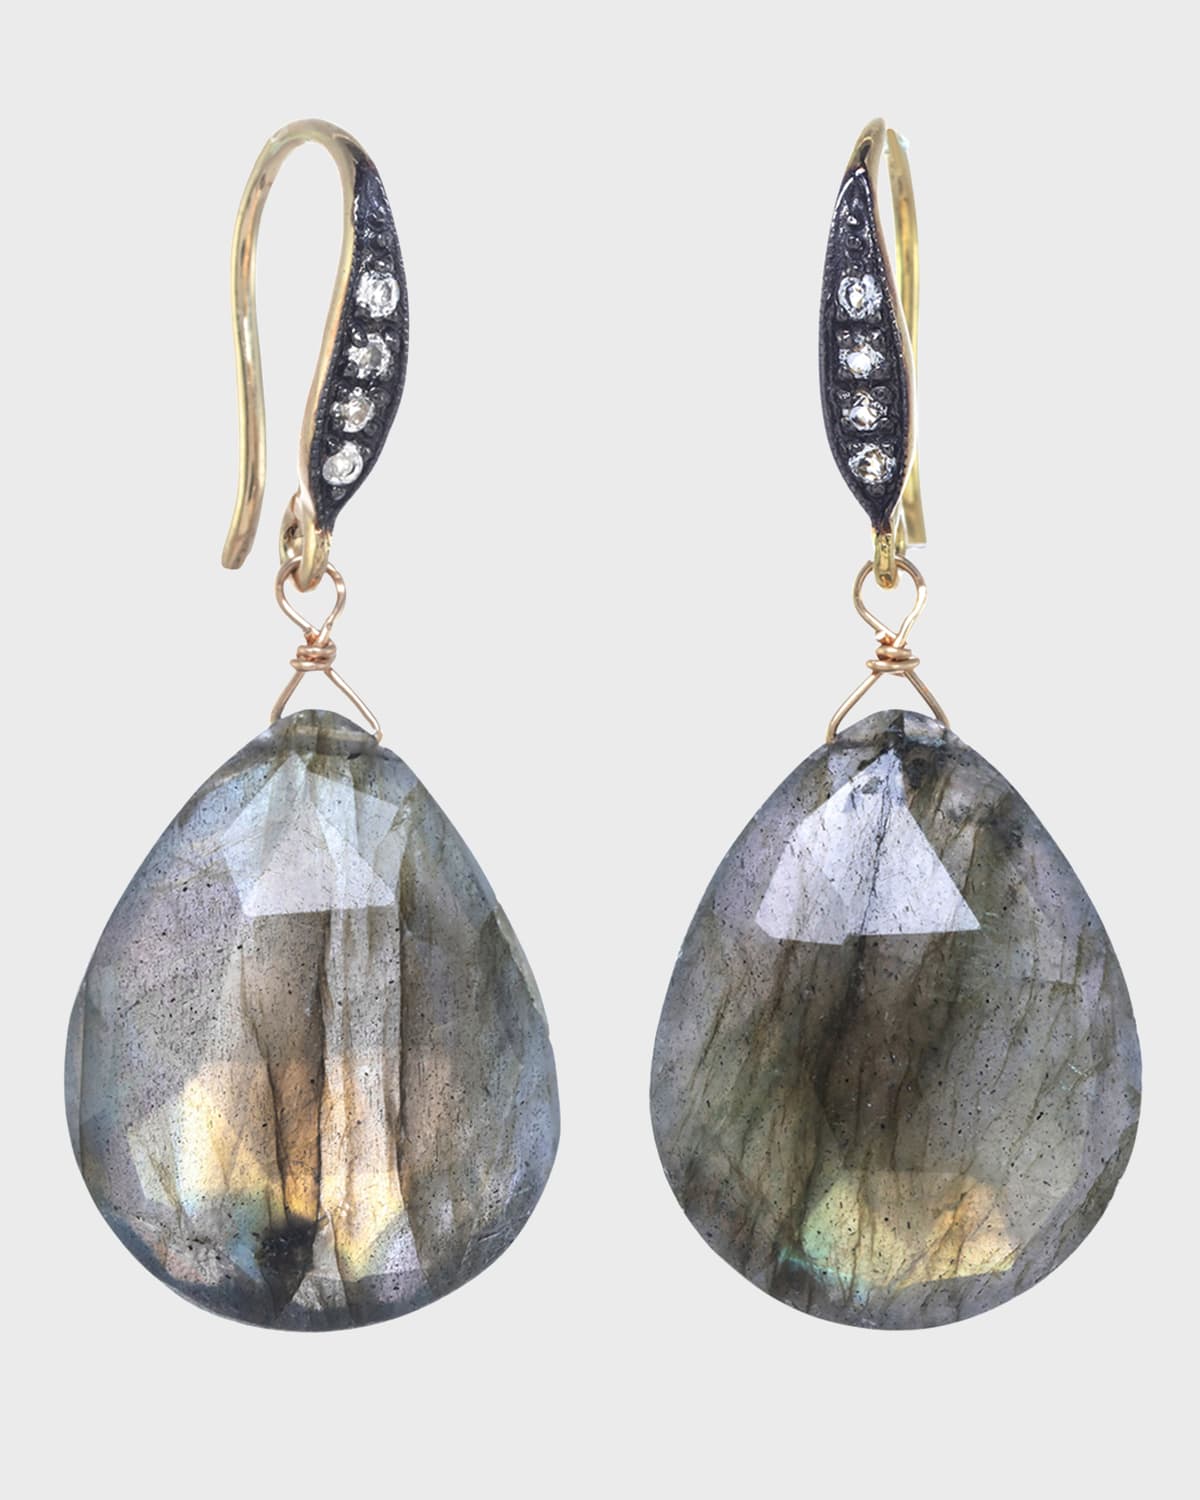 Margo Morrison Grey Baroque Earrings With White Sapphires On A Vermeil Top In Labradorite